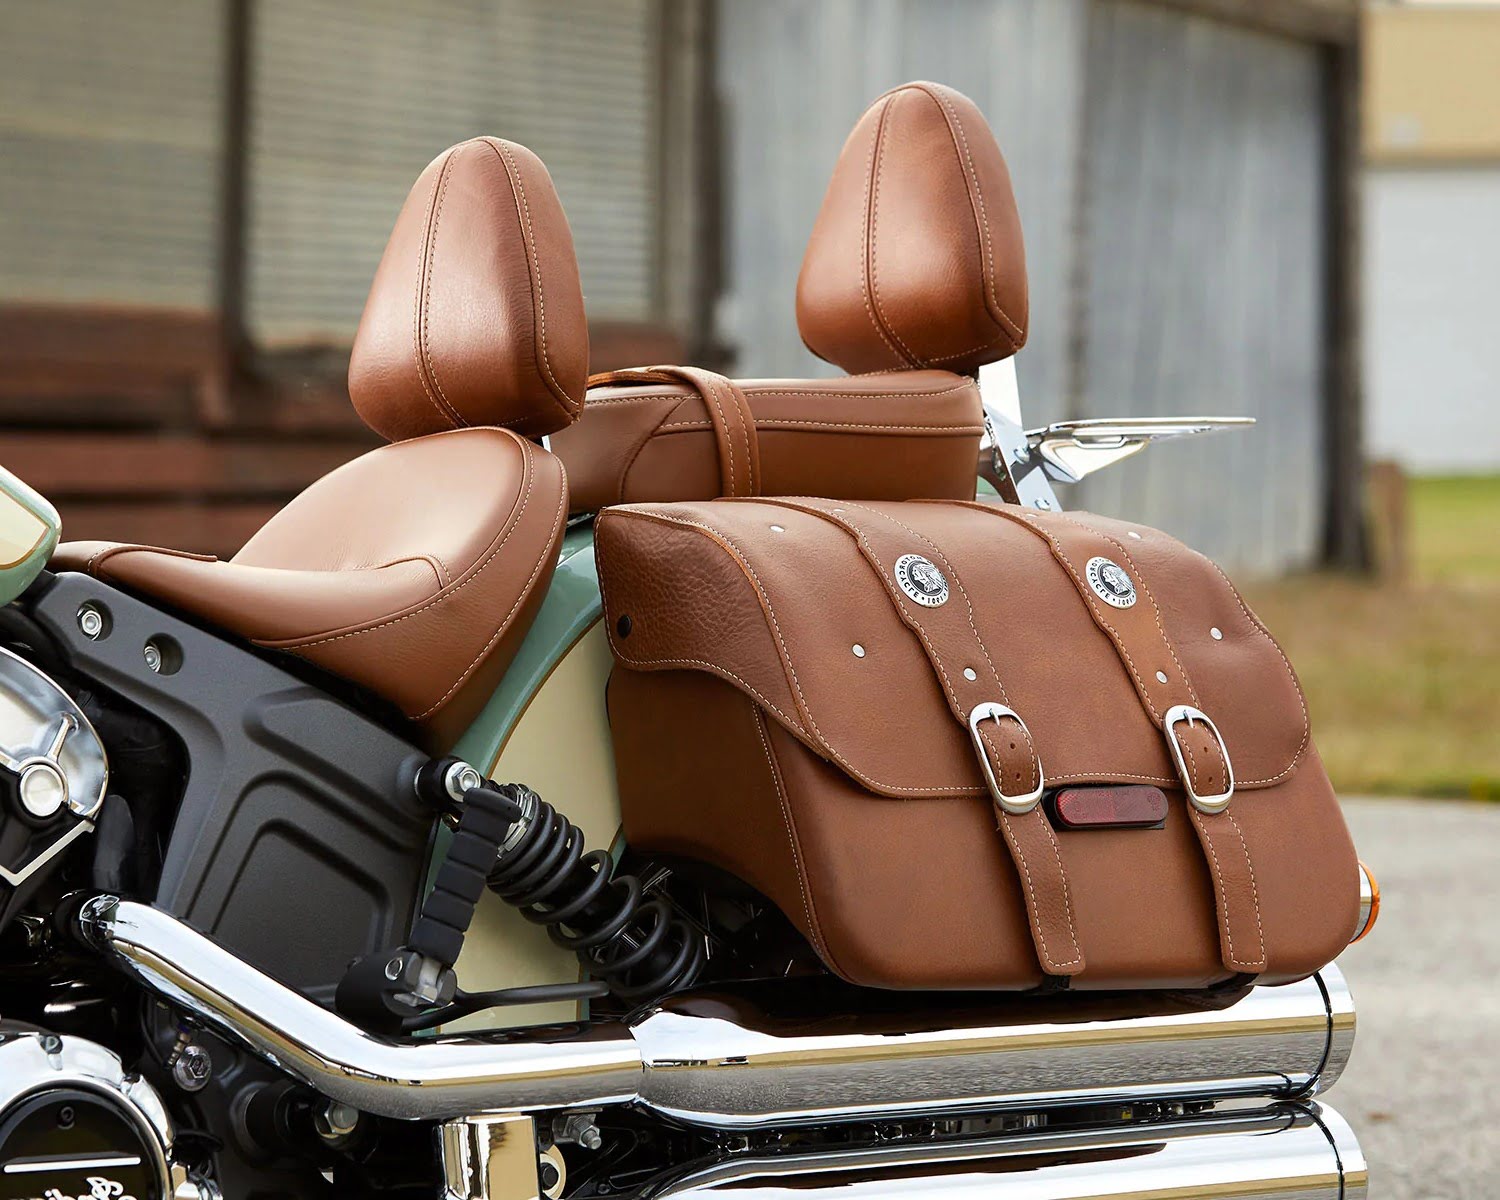 Ultimate Saddlebags Review: Must-Have Accessory for Him